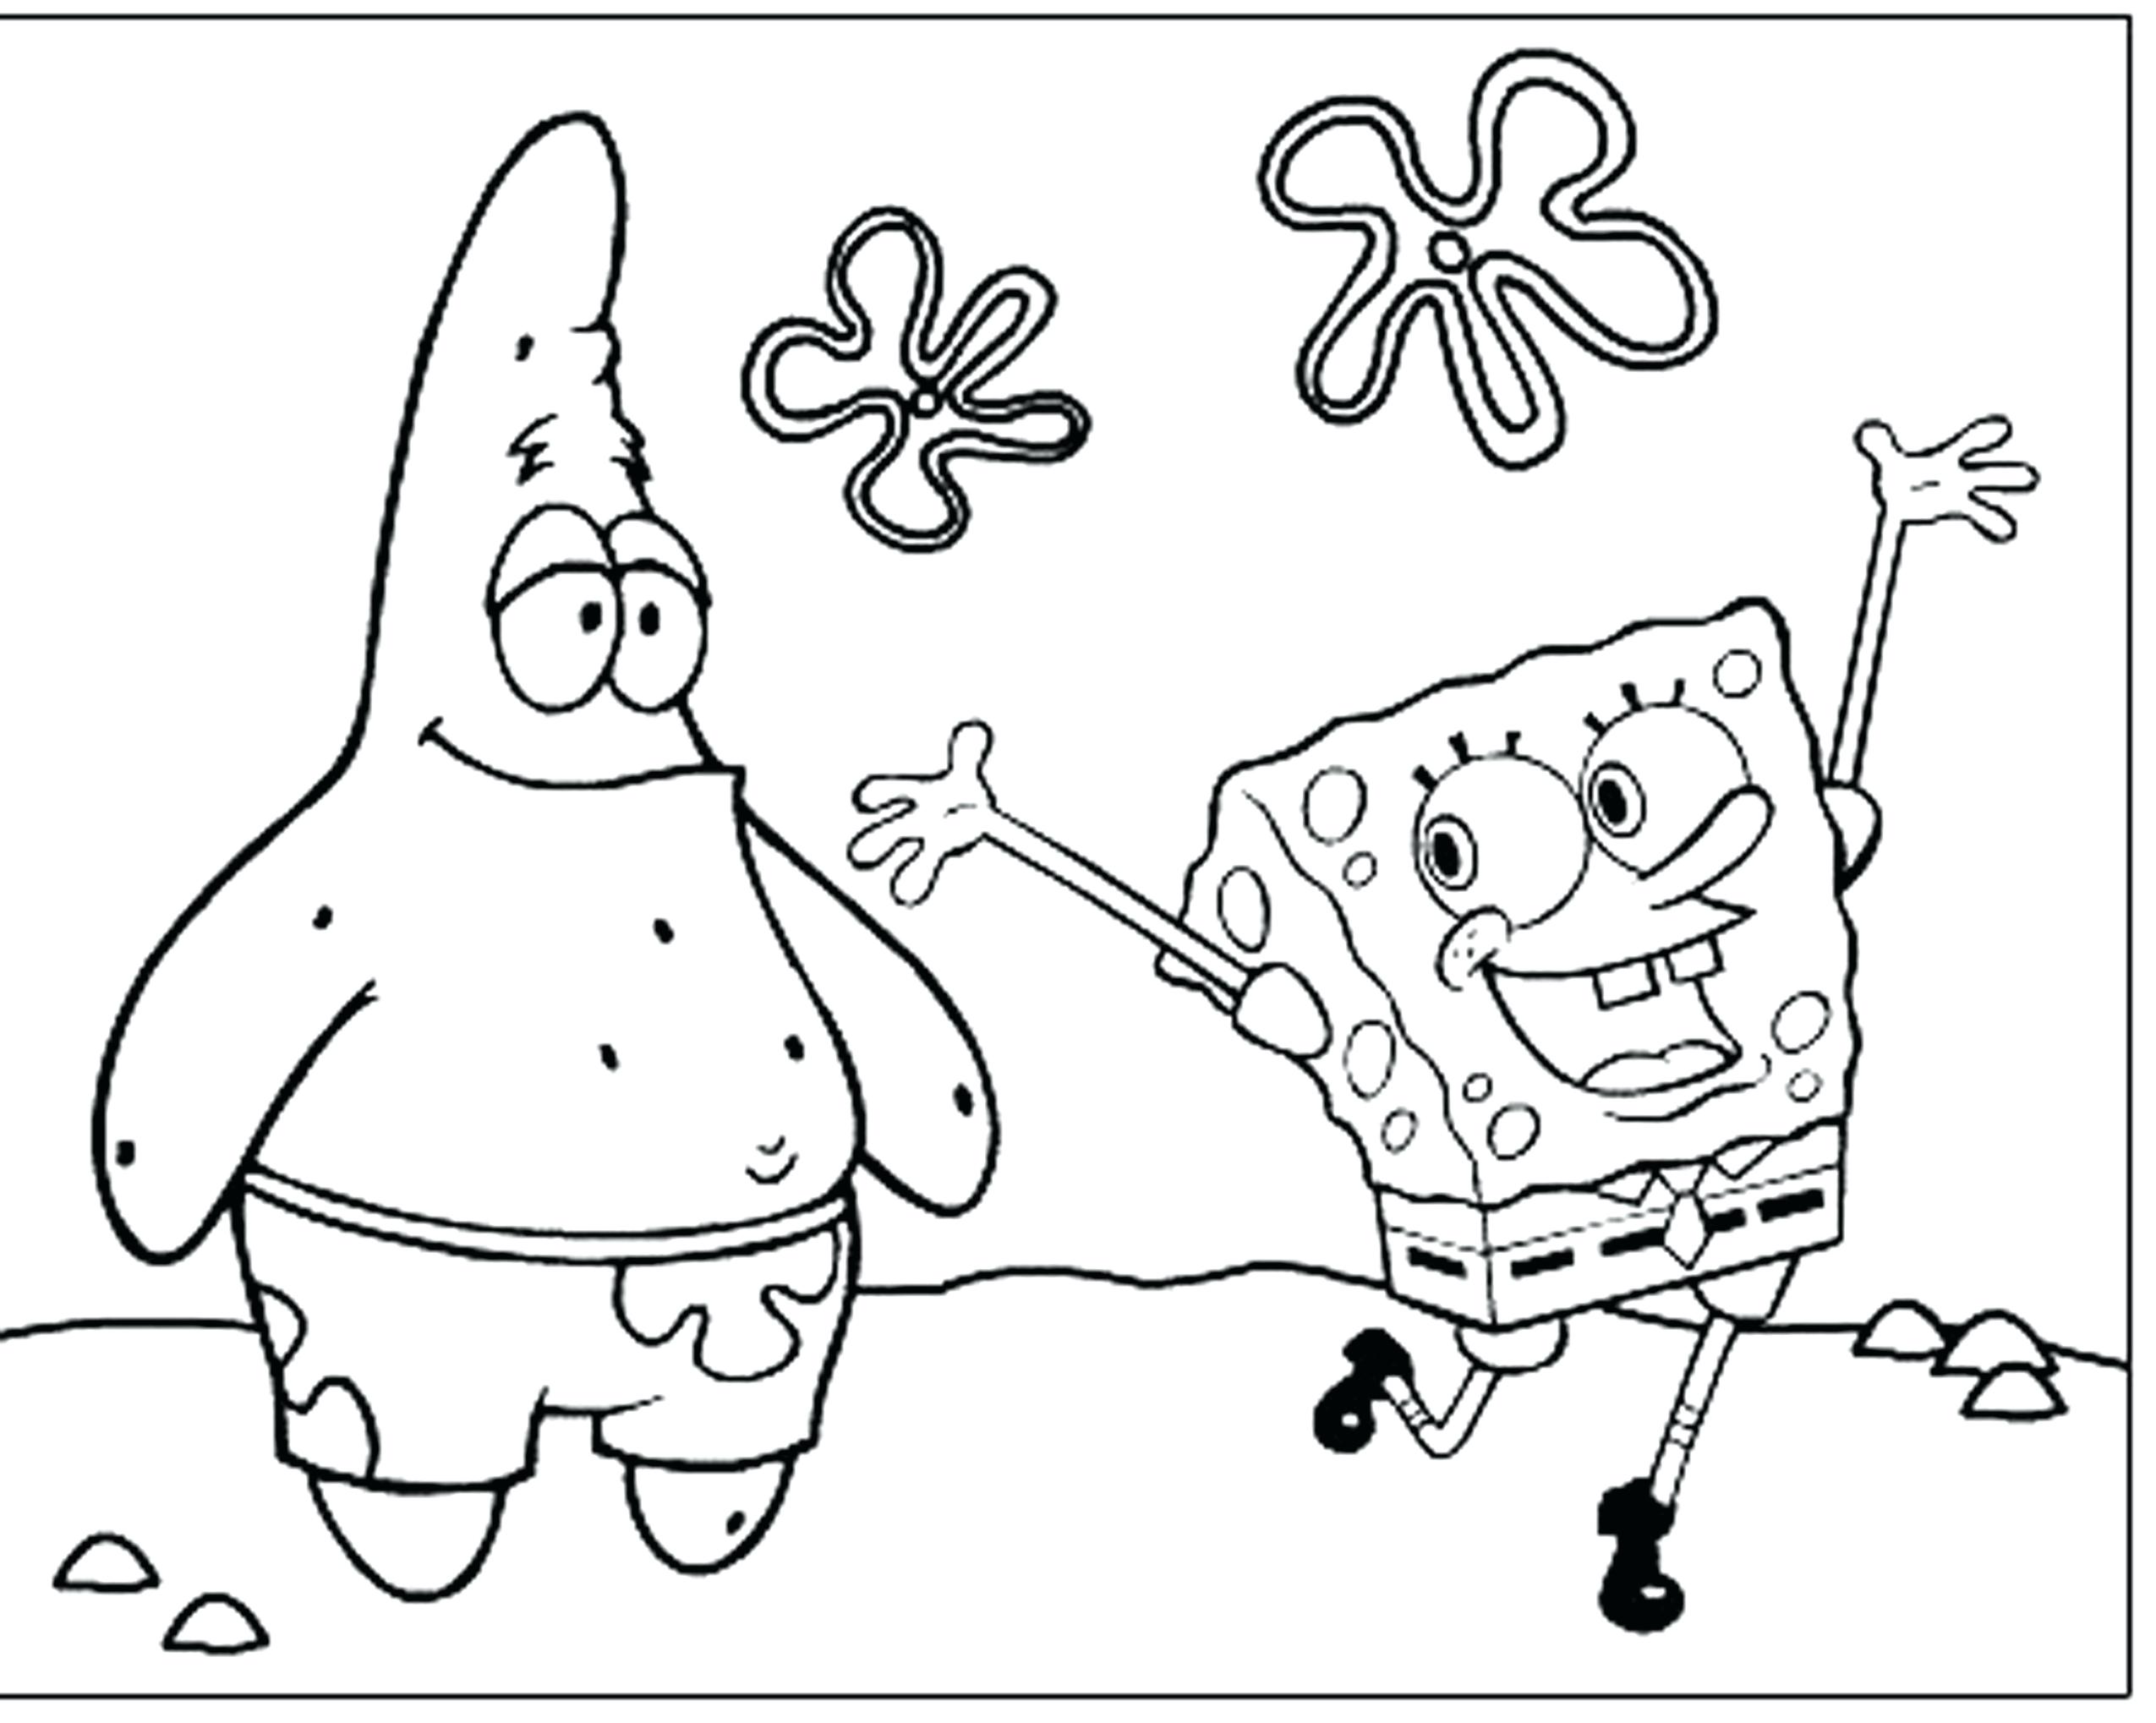 Nickelodeon Halloween Coloring Pages at GetColorings.com | Free